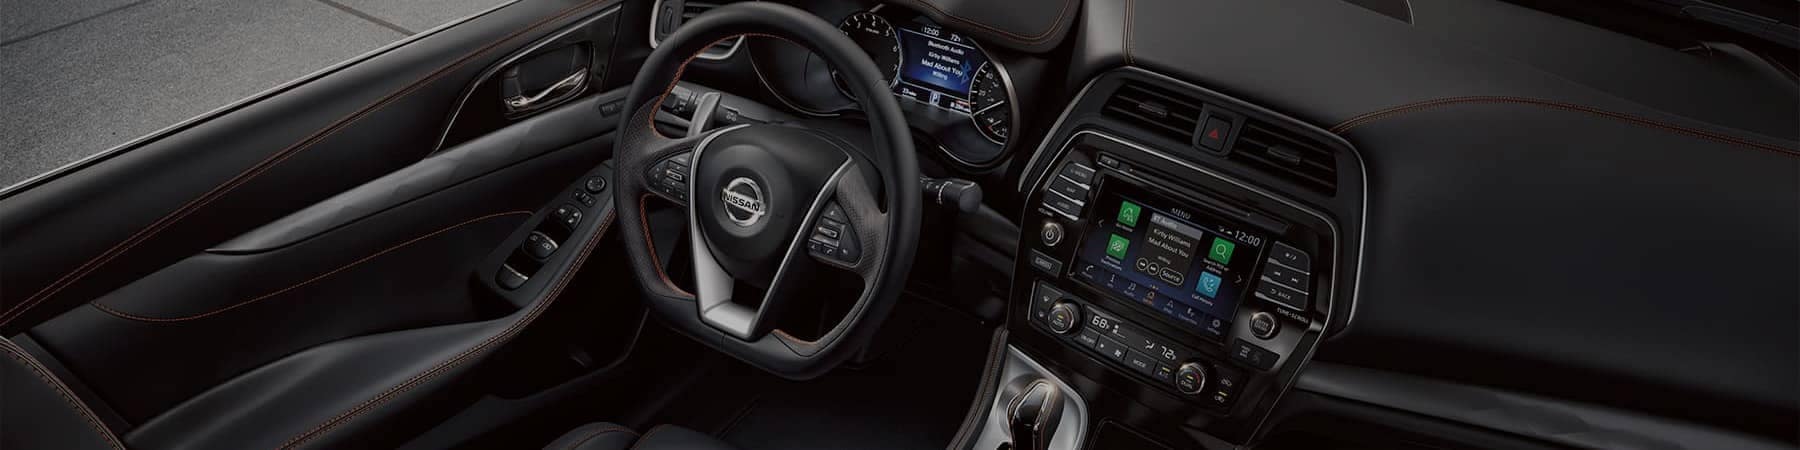 The black leather drivers seat and dashboard of a 2021 Nissan Maxima